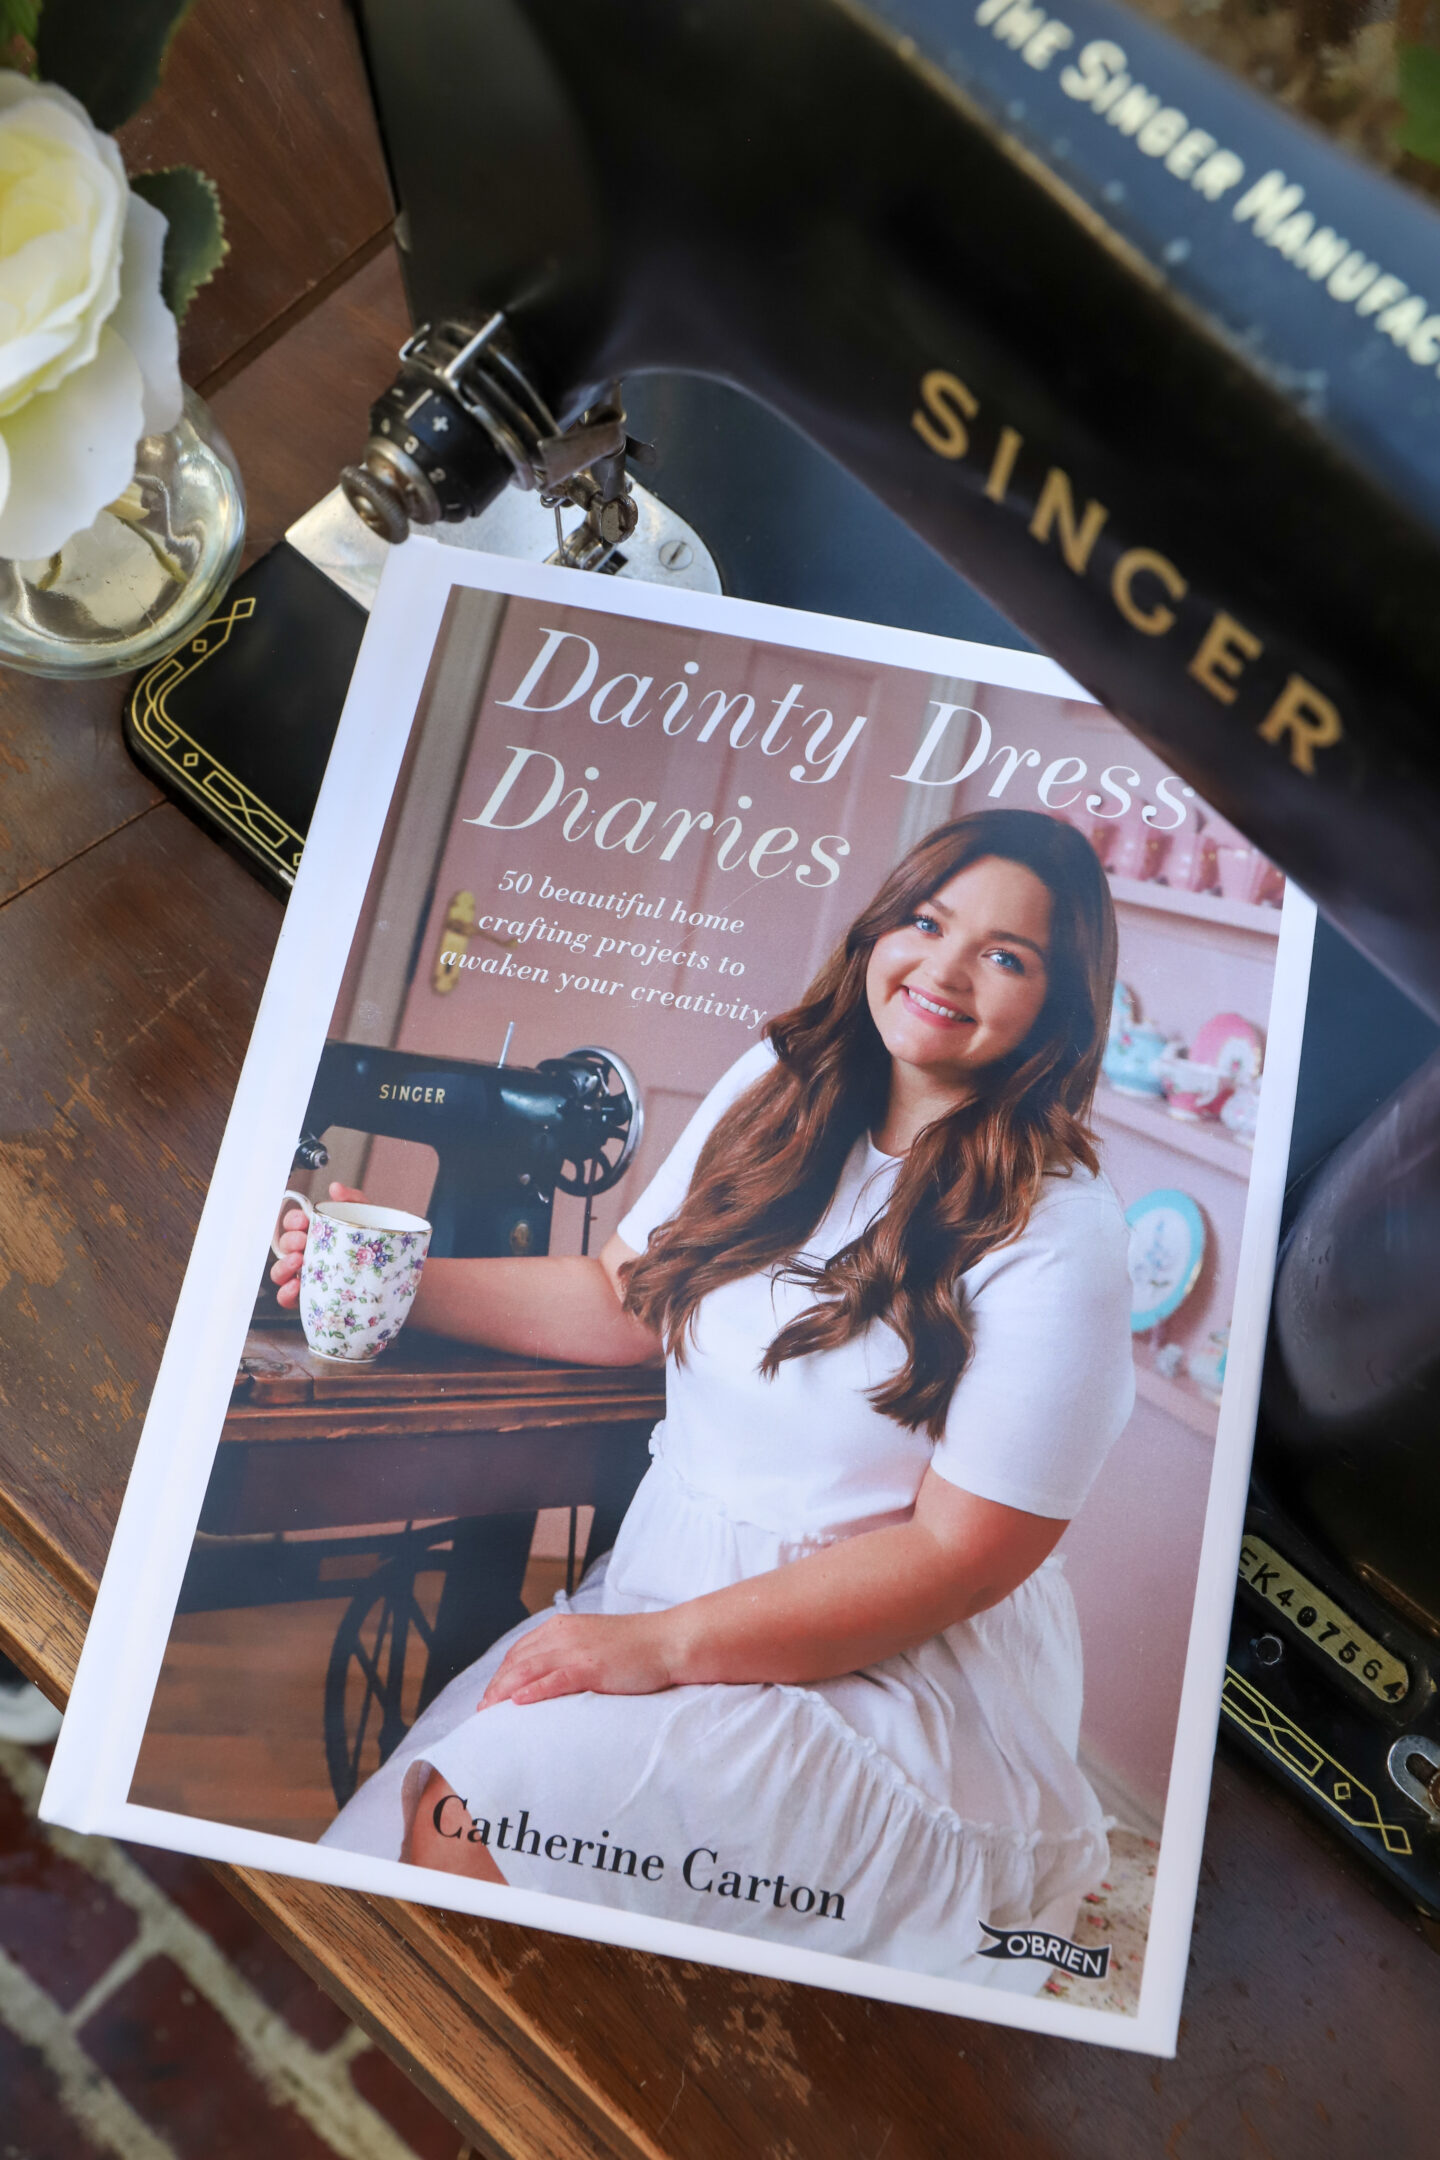 Dainty Dress Diaries book. Where to buy. 